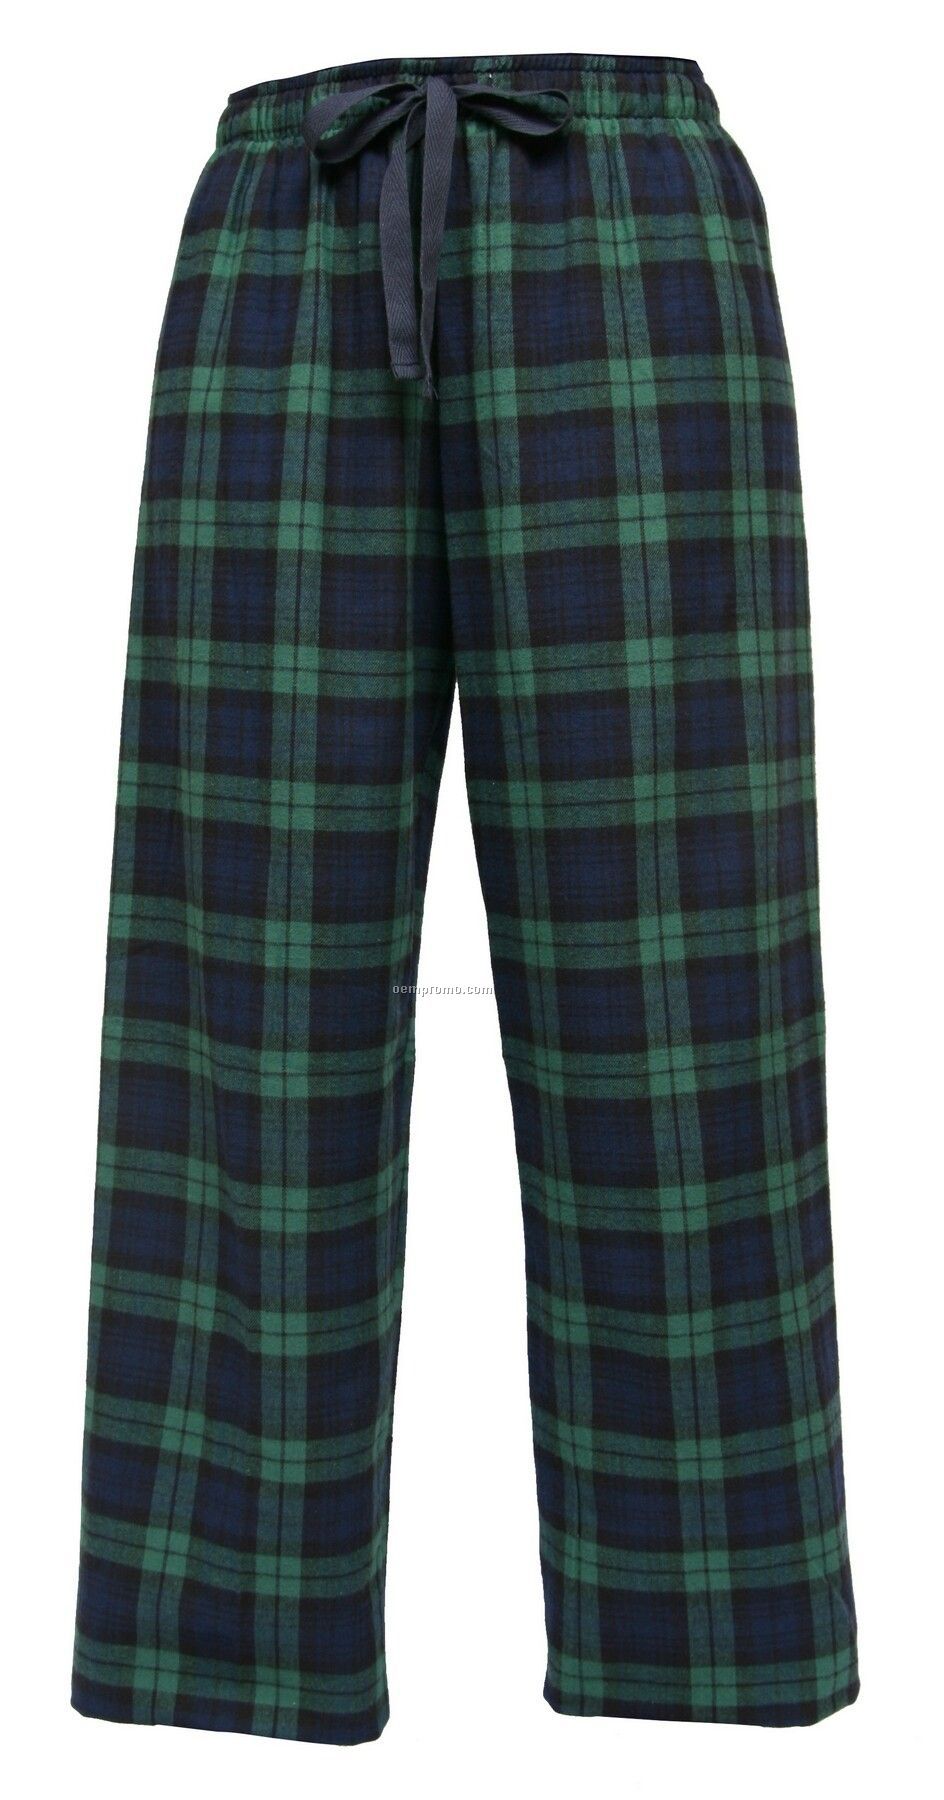 Adult Blackwatch Plaid Fashion Flannel Pants With Tie Cord